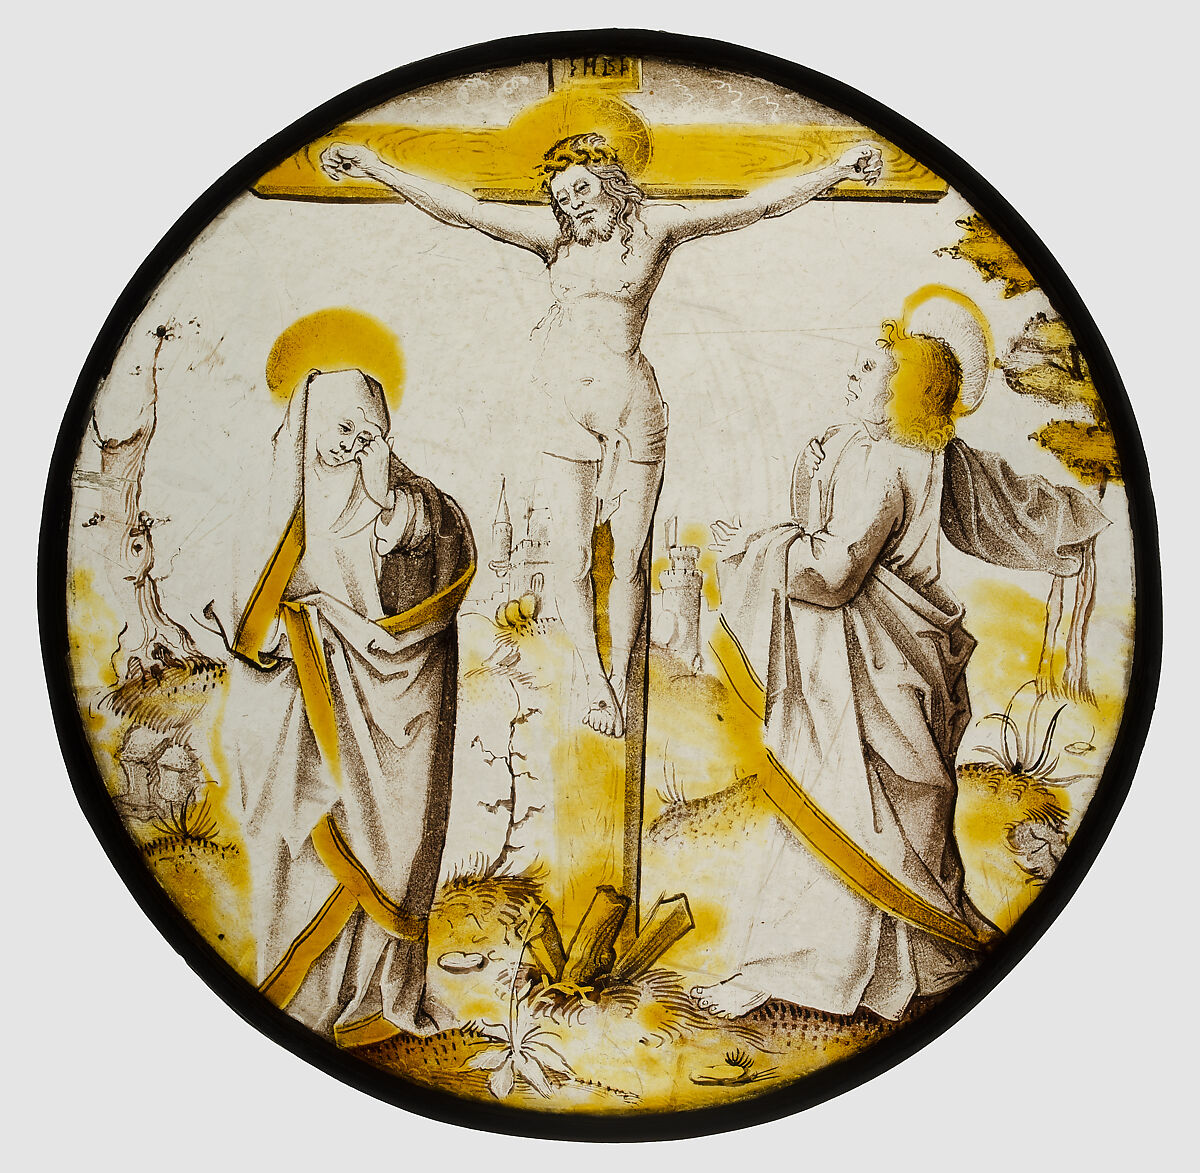 Roundel with the Crucifixion, the Virgin, and Saint John, Colorless glass, silver stain, vitreous paint, South Netherlandish 